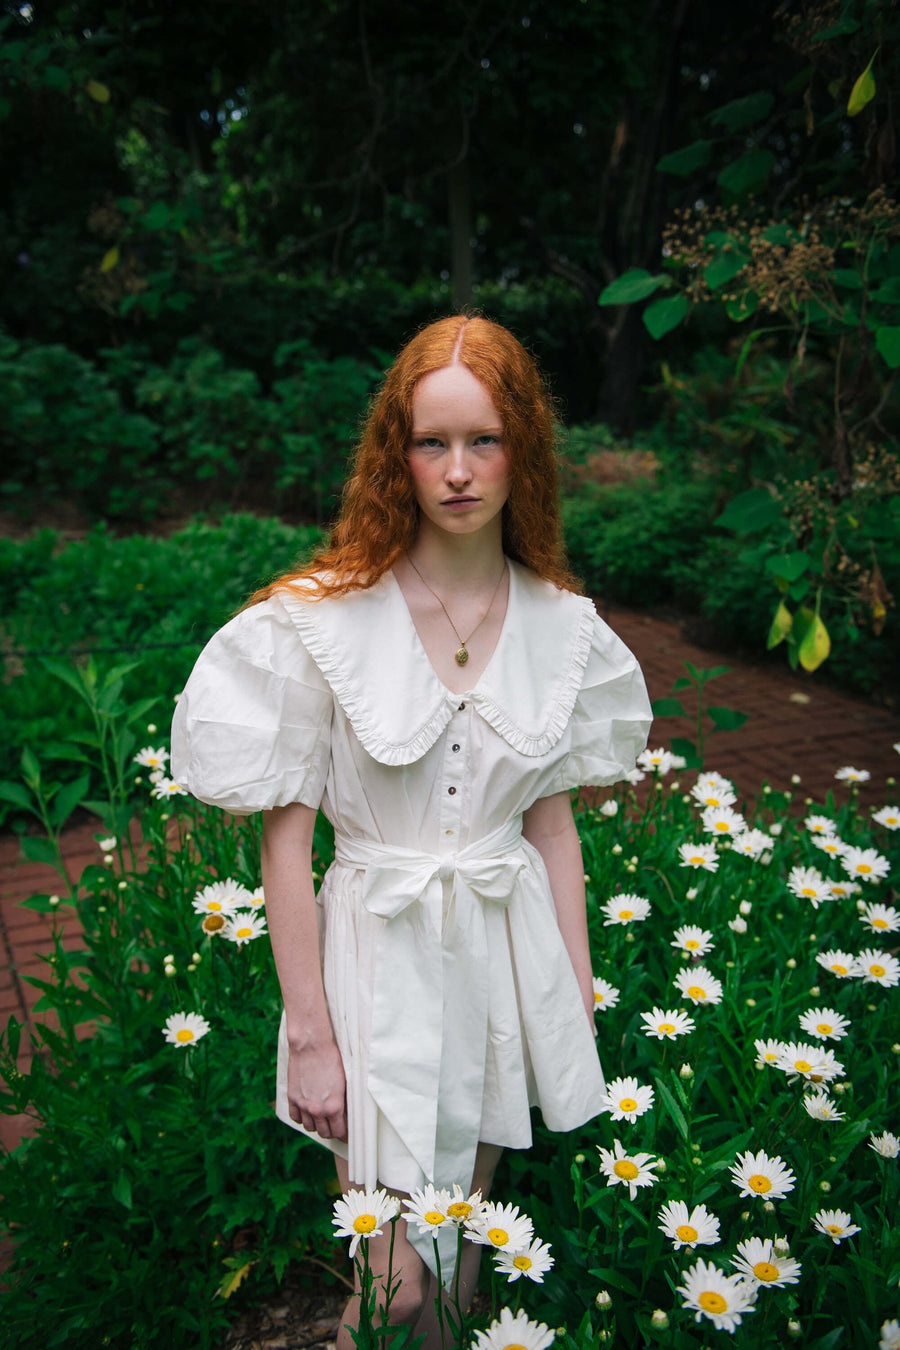 Peter pan collar on the Hazel Mini Dress in white by Australian fashion label House of Campbell.